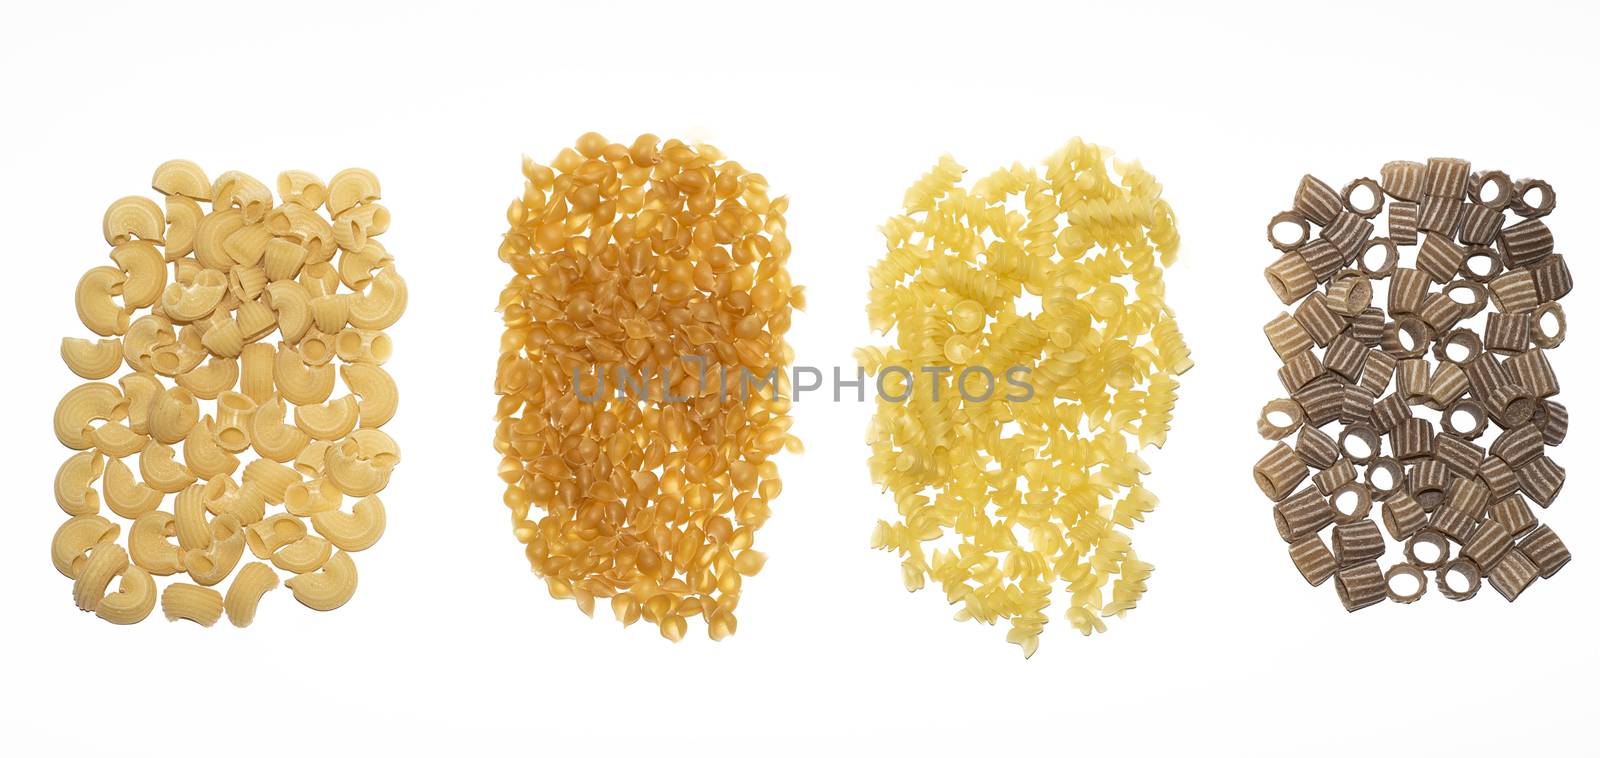 Closeup detail of four pasta types isolated on a white background abstract food image